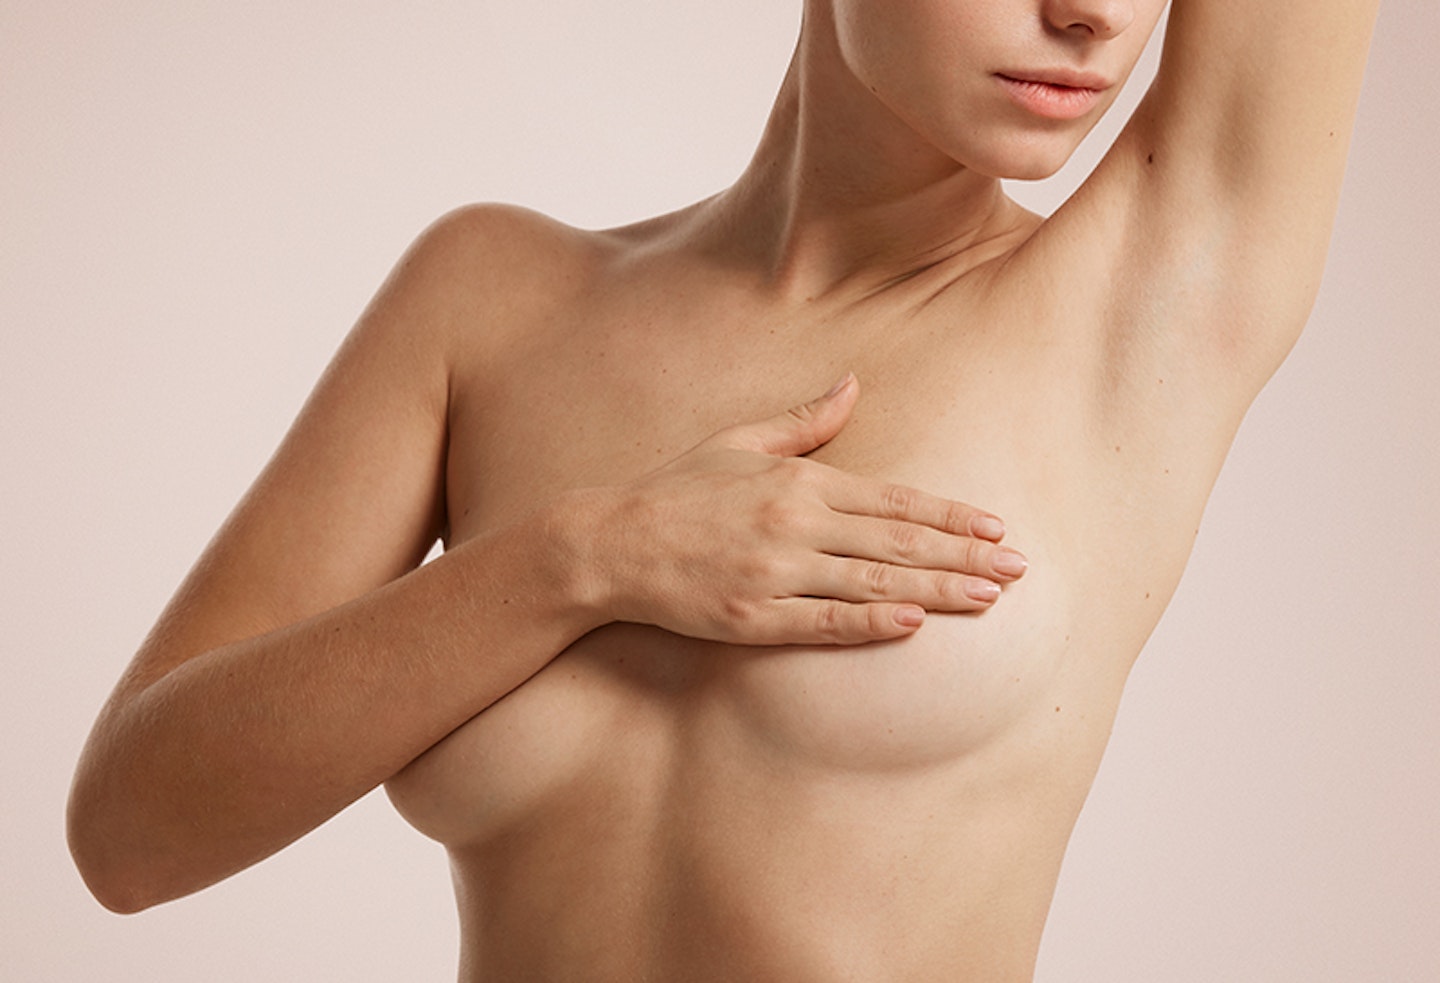 I wore fake nipples for a week because let's face it, we all want